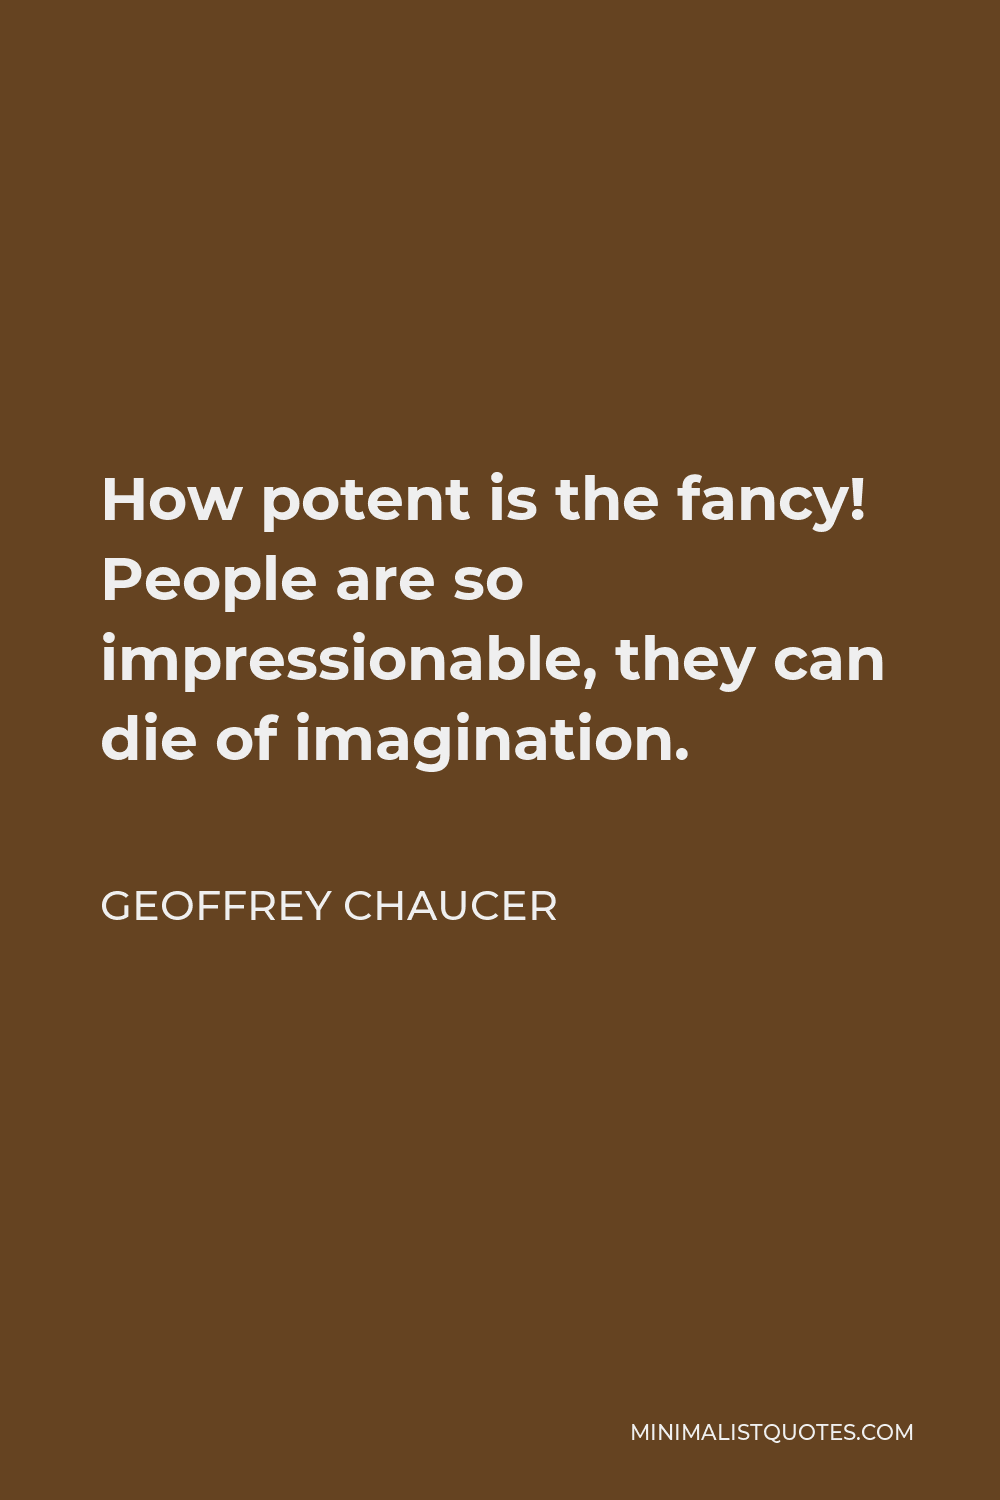 Geoffrey Chaucer Quote - How potent is the fancy! People are so impressionable, they can die of imagination.